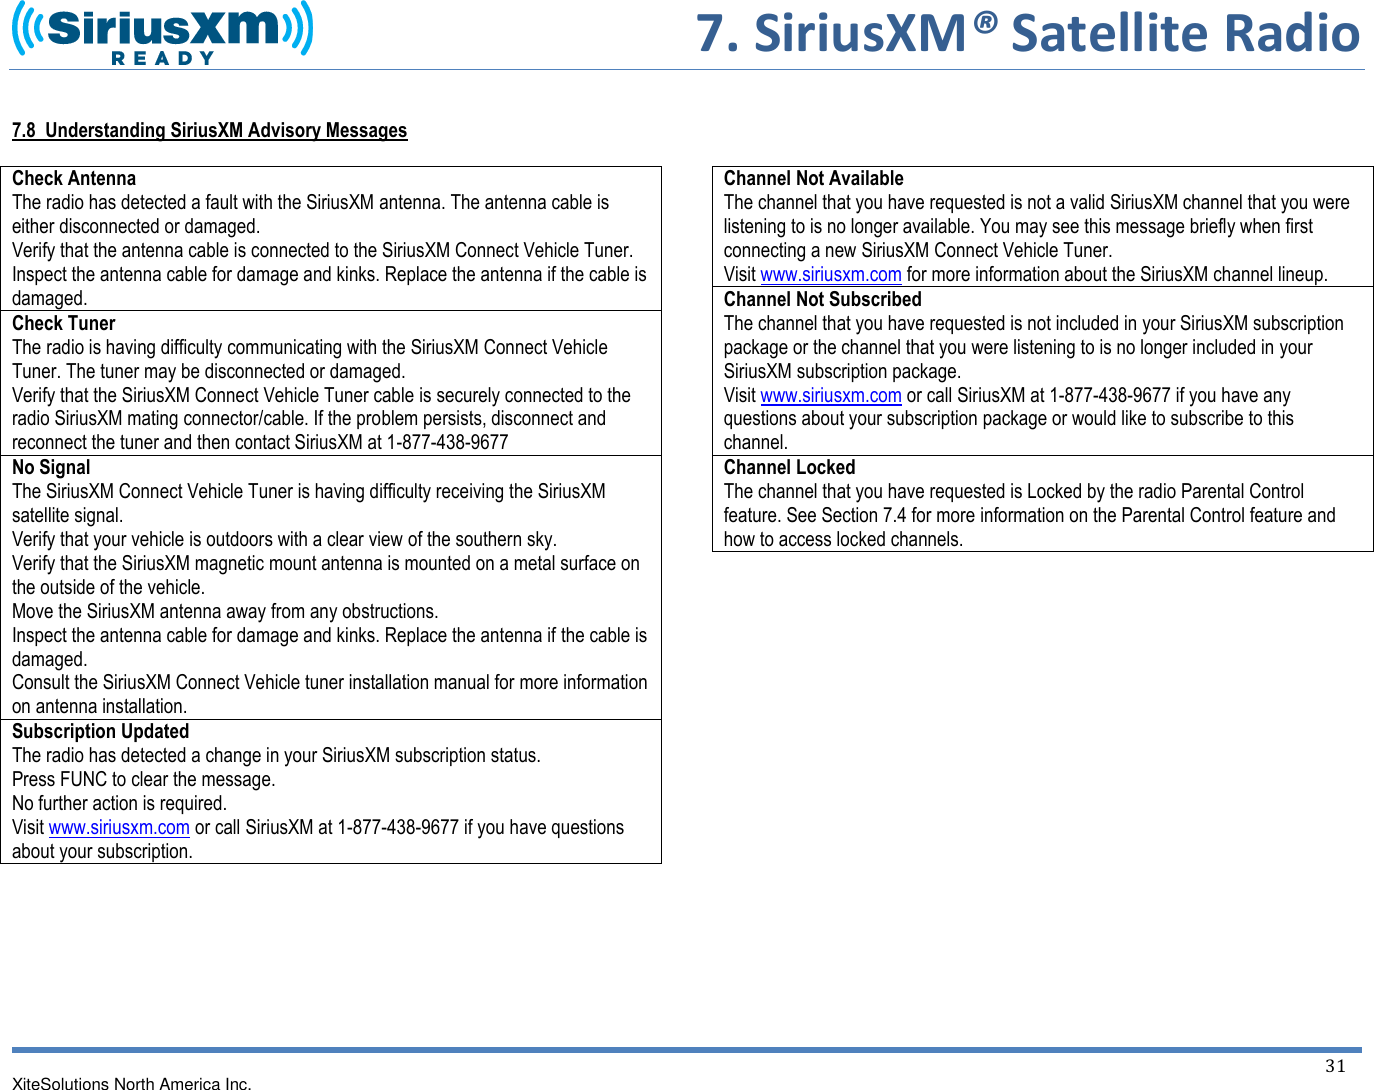       7. SiriusXM® Satellite Radio XiteSolutions North America Inc.    31   7.8  Understanding SiriusXM Advisory Messages  Check Antenna The radio has detected a fault with the SiriusXM antenna. The antenna cable is either disconnected or damaged.  Verify that the antenna cable is connected to the SiriusXM Connect Vehicle Tuner. Inspect the antenna cable for damage and kinks. Replace the antenna if the cable is damaged. Check Tuner The radio is having difficulty communicating with the SiriusXM Connect Vehicle Tuner. The tuner may be disconnected or damaged.  Verify that the SiriusXM Connect Vehicle Tuner cable is securely connected to the radio SiriusXM mating connector/cable. If the problem persists, disconnect and reconnect the tuner and then contact SiriusXM at 1-877-438-9677 No Signal The SiriusXM Connect Vehicle Tuner is having difficulty receiving the SiriusXM satellite signal. Verify that your vehicle is outdoors with a clear view of the southern sky. Verify that the SiriusXM magnetic mount antenna is mounted on a metal surface on the outside of the vehicle. Move the SiriusXM antenna away from any obstructions. Inspect the antenna cable for damage and kinks. Replace the antenna if the cable is damaged. Consult the SiriusXM Connect Vehicle tuner installation manual for more information on antenna installation. Subscription Updated The radio has detected a change in your SiriusXM subscription status. Press FUNC to clear the message. No further action is required. Visit www.siriusxm.com or call SiriusXM at 1-877-438-9677 if you have questions about your subscription.            Channel Not Available  The channel that you have requested is not a valid SiriusXM channel that you were listening to is no longer available. You may see this message briefly when first connecting a new SiriusXM Connect Vehicle Tuner. Visit www.siriusxm.com for more information about the SiriusXM channel lineup. Channel Not Subscribed The channel that you have requested is not included in your SiriusXM subscription package or the channel that you were listening to is no longer included in your SiriusXM subscription package.  Visit www.siriusxm.com or call SiriusXM at 1-877-438-9677 if you have any questions about your subscription package or would like to subscribe to this channel. Channel Locked The channel that you have requested is Locked by the radio Parental Control feature. See Section 7.4 for more information on the Parental Control feature and how to access locked channels.            